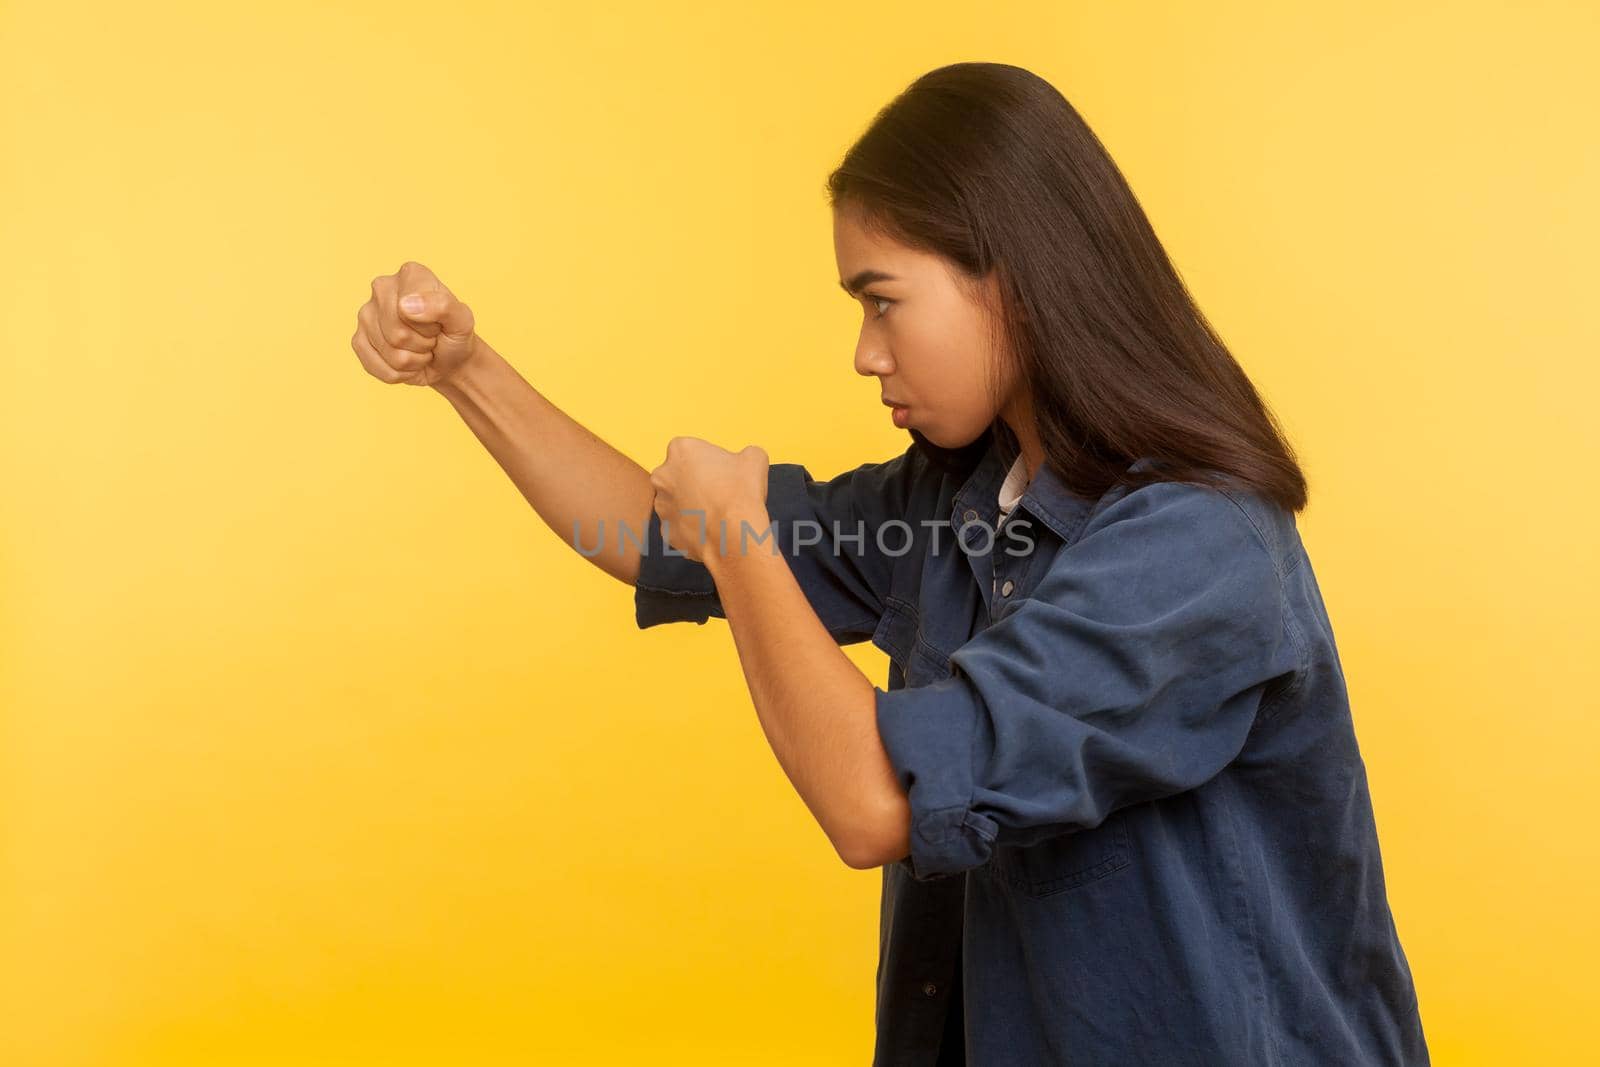 Let's fight. Side view of confident courageous girl in denim shirt keeping fists clenched, boxing and punching to side, struggle and self-defense concept. studio shot isolated on yellow background